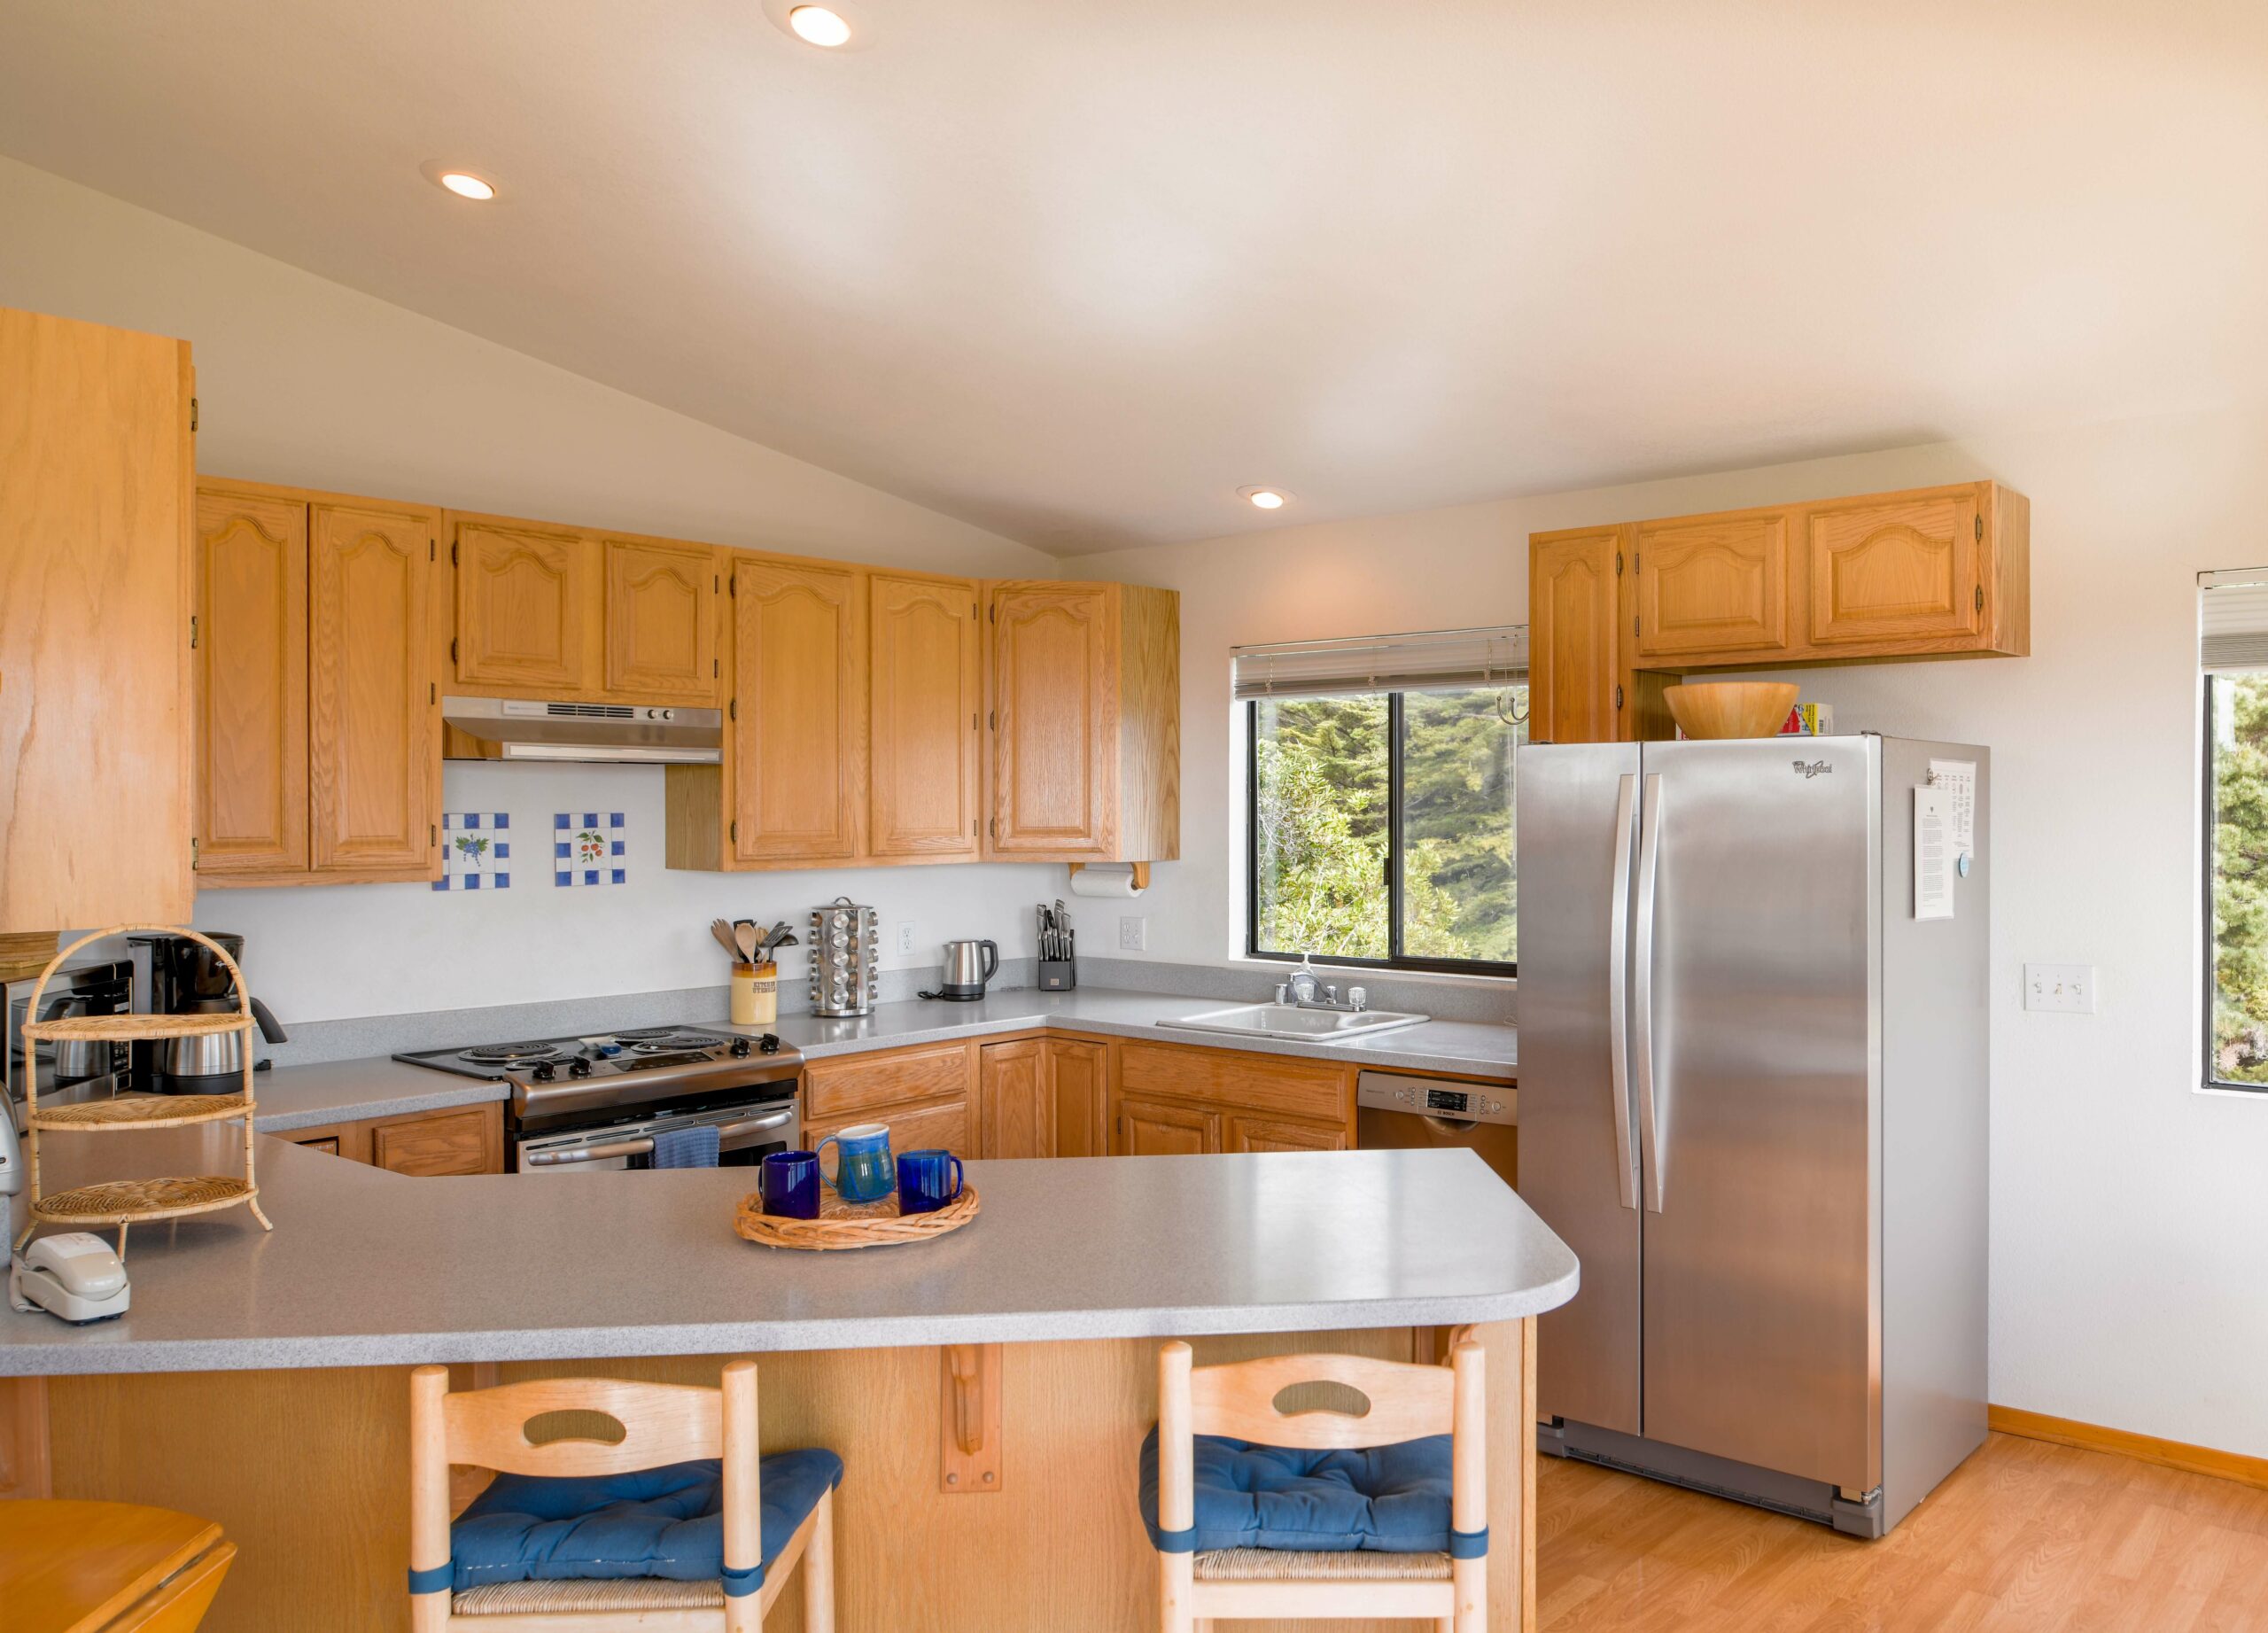 Mare Vista: kitchen with wood cabinets and breakfast bar.